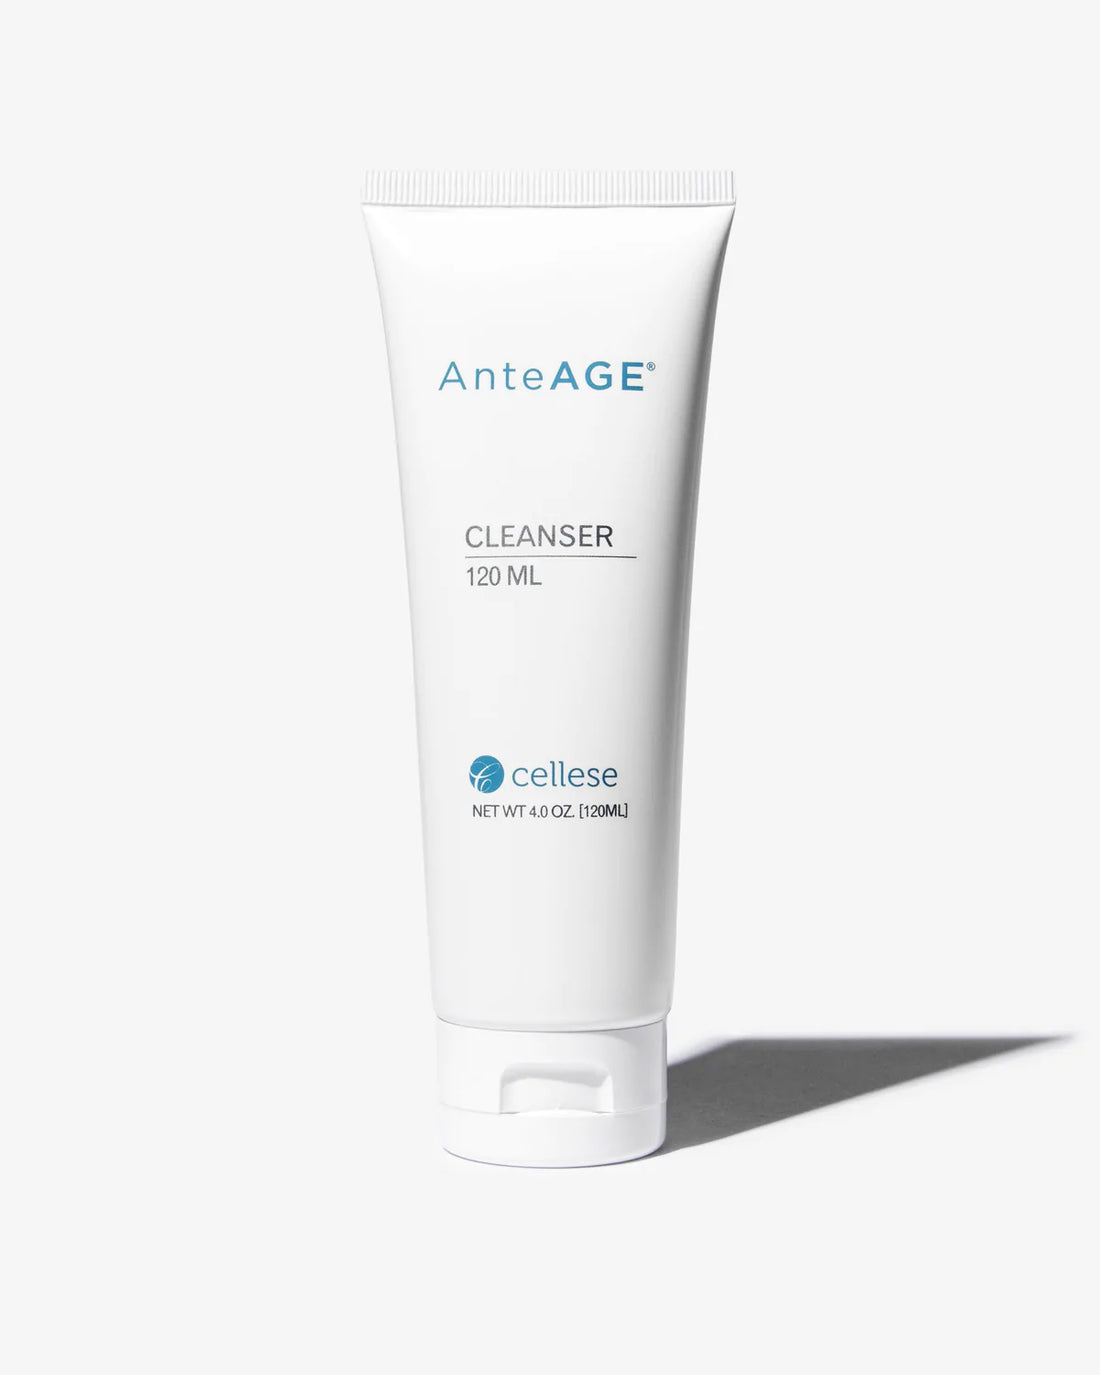 AnteAGE Cleanser 120ml